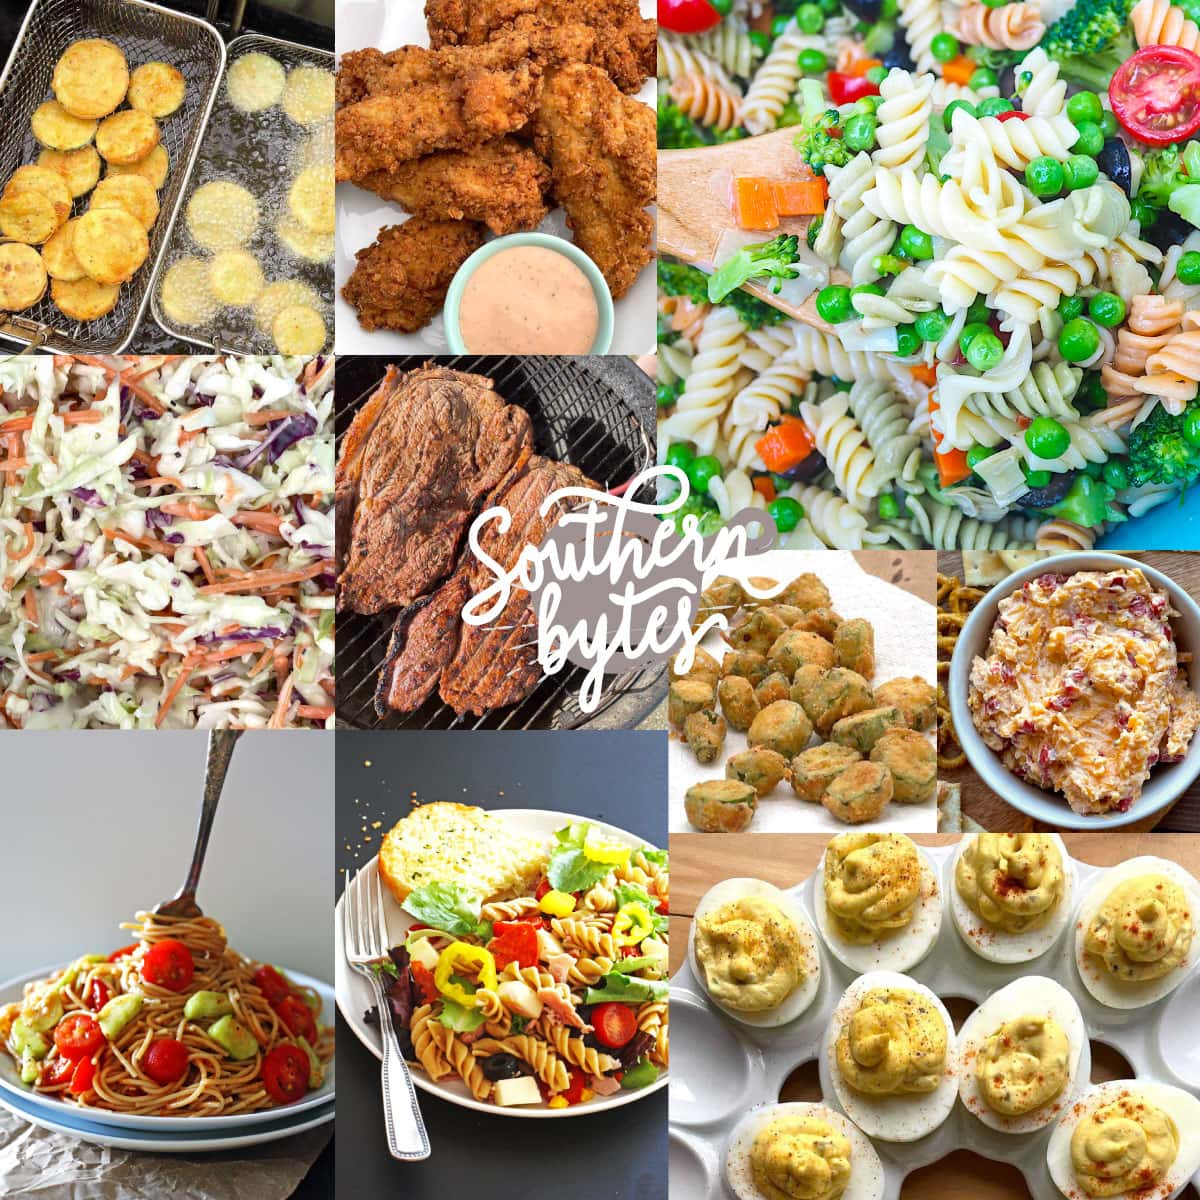 A collage of images showing what to serve with pasta salad - fried okra, fried squash, coleslaw, steak, chicken tenders, and deviled eggs.